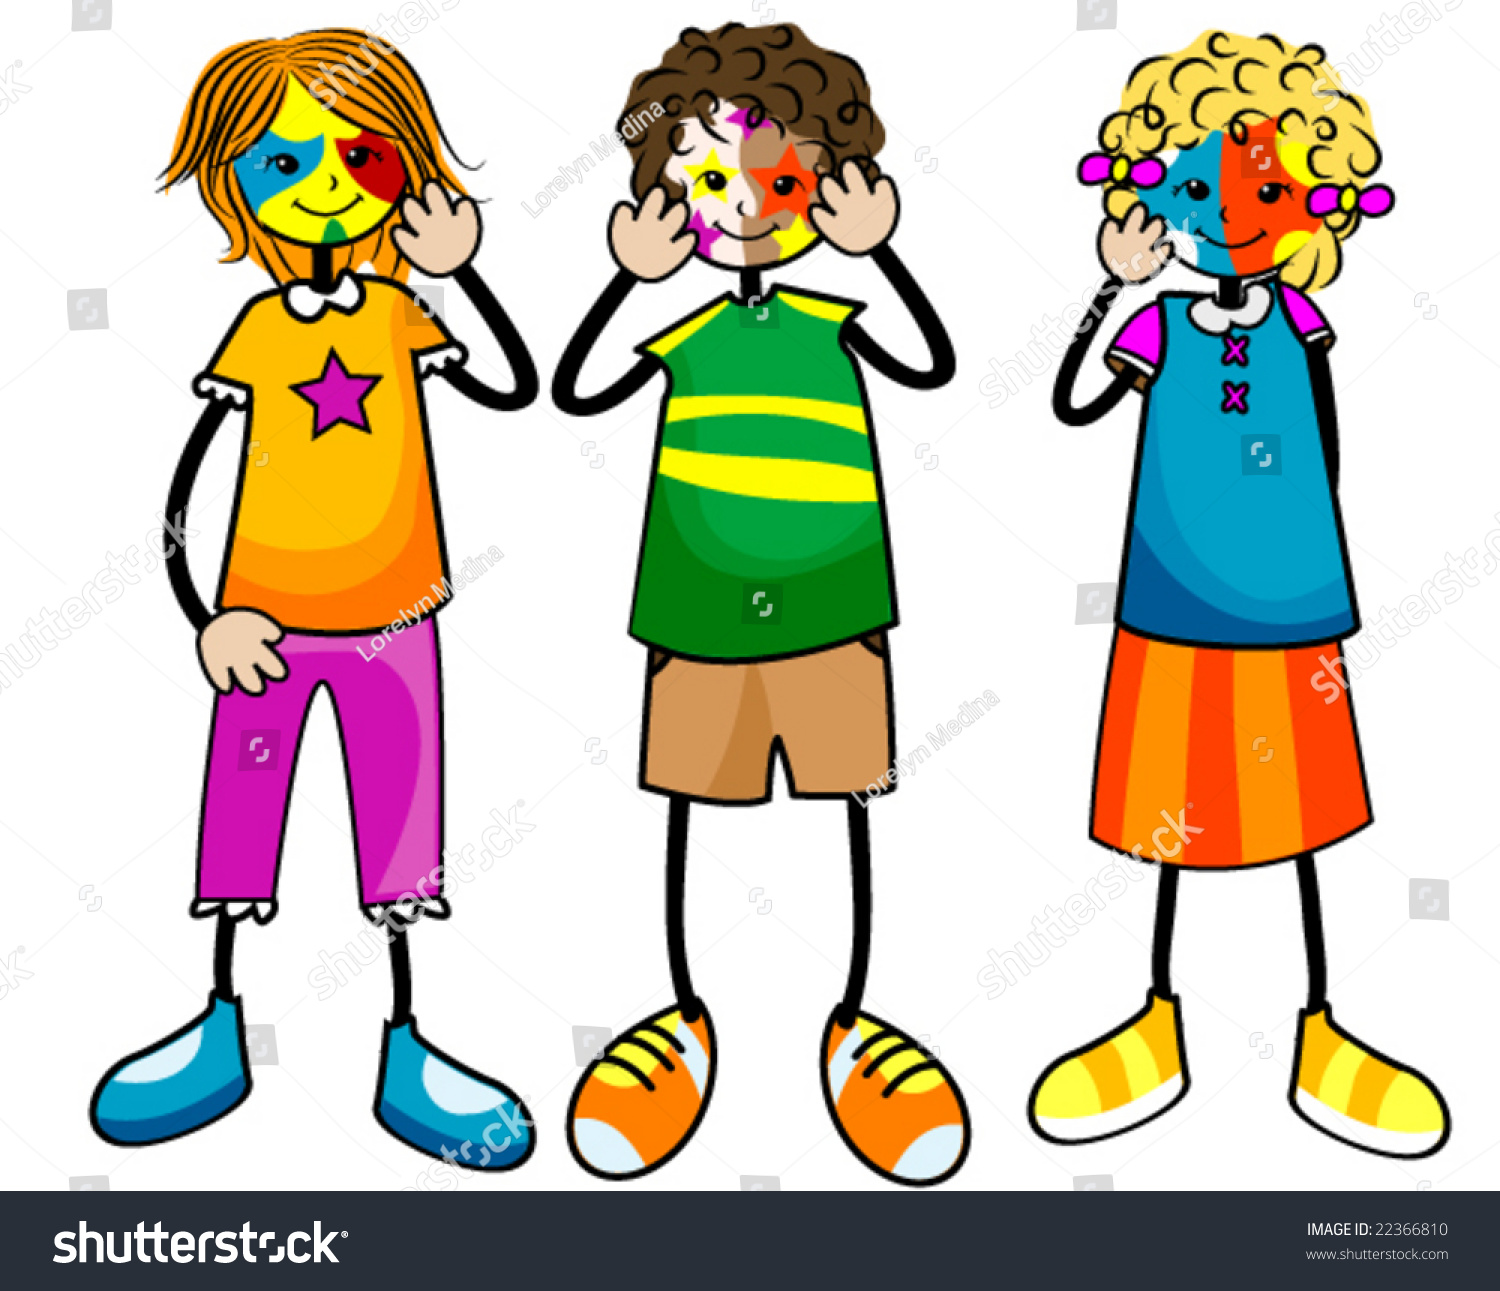 Face Painting Vector Stock Vector 22366810 - Shutterstock